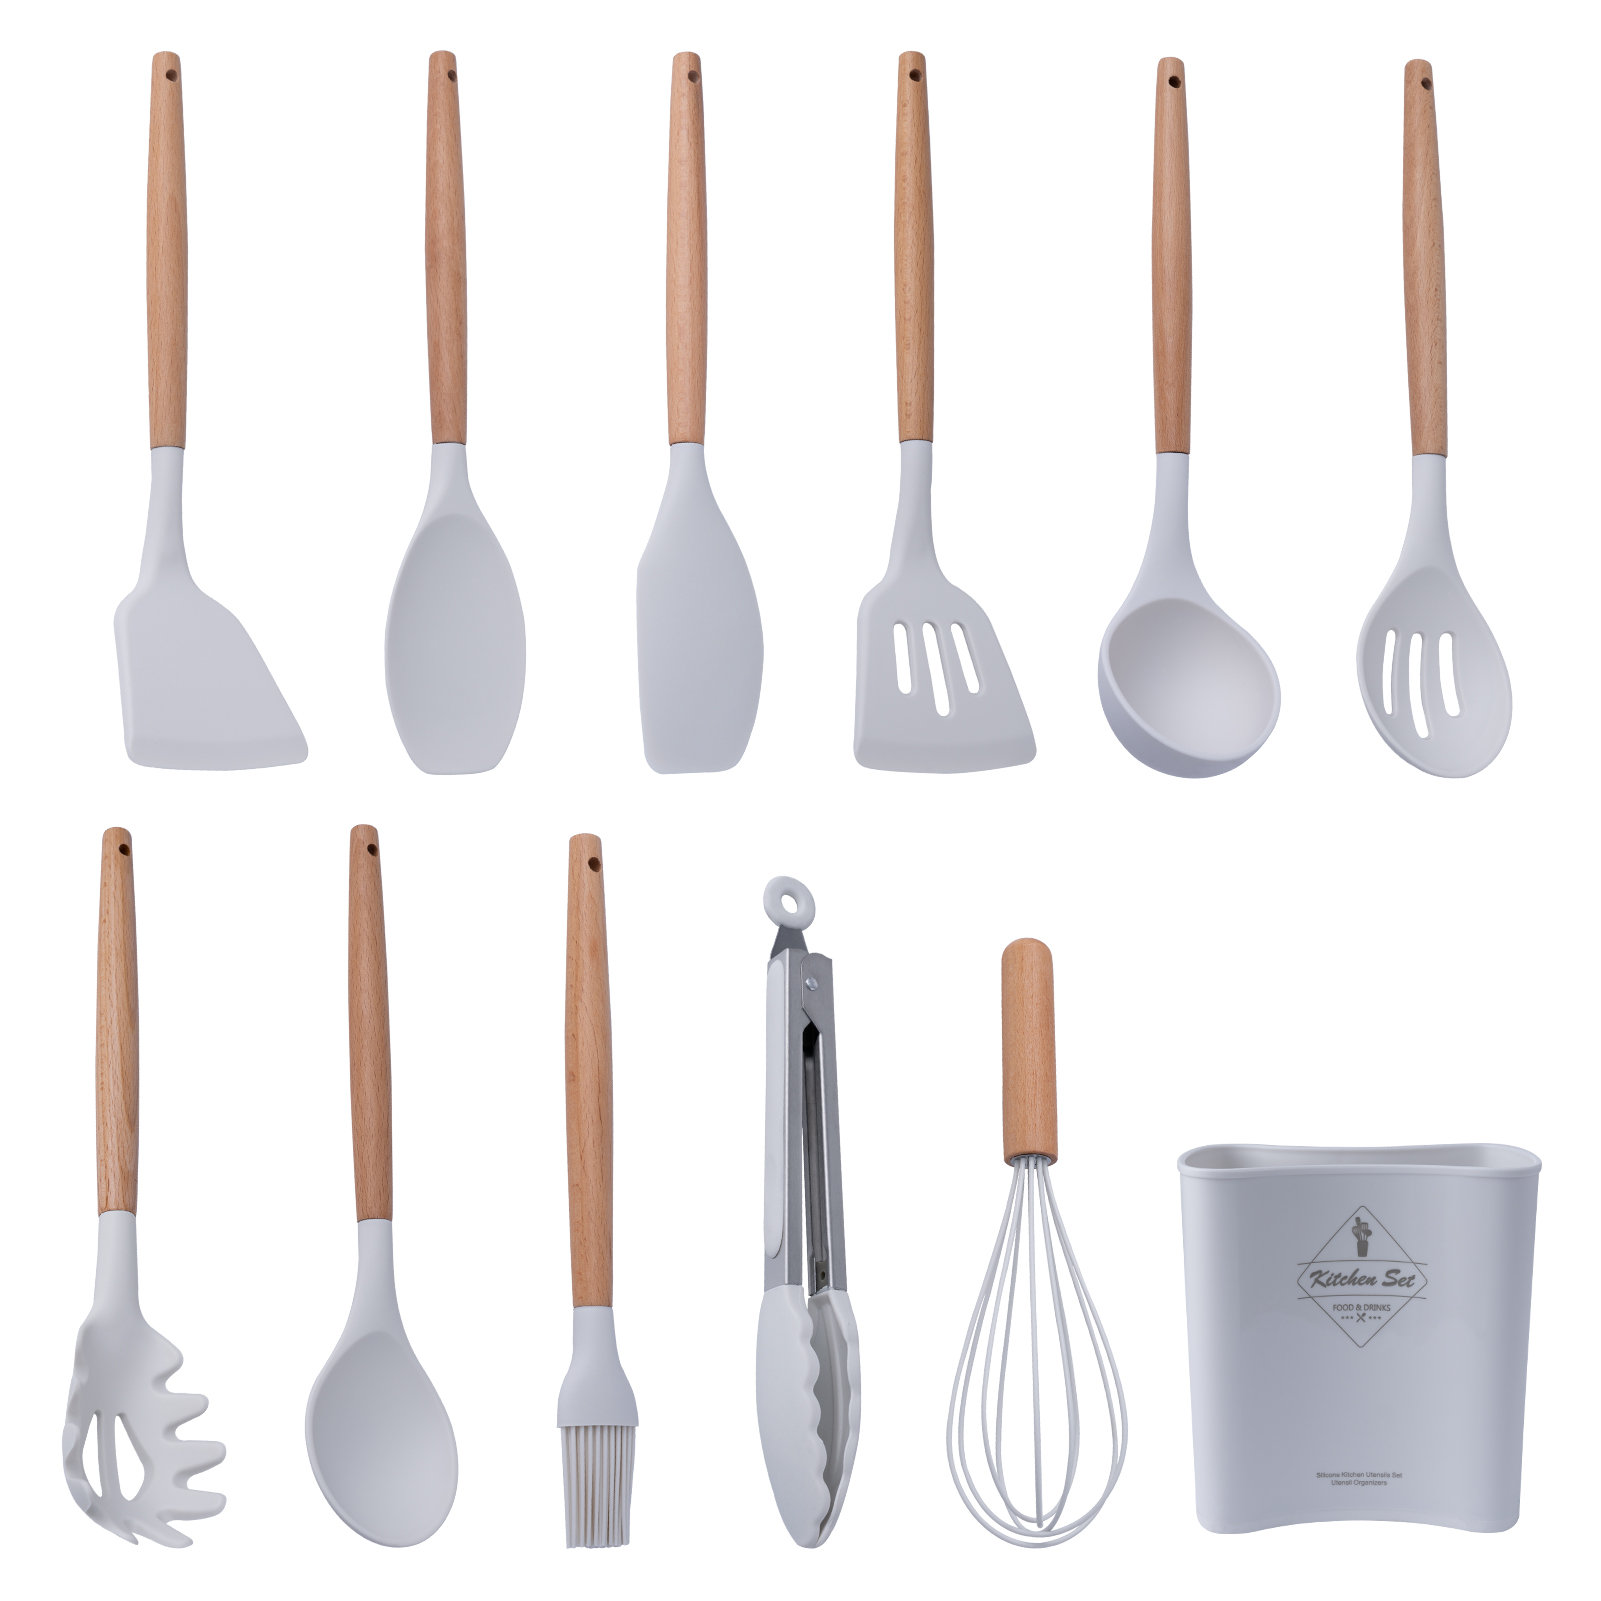 Dropship Kitchen Utensils Set, 21 Piece Wood And Silicone, Cooking Utensils,  Dishwasher Safe And Heat Resistant Kitchen Tools to Sell Online at a Lower  Price